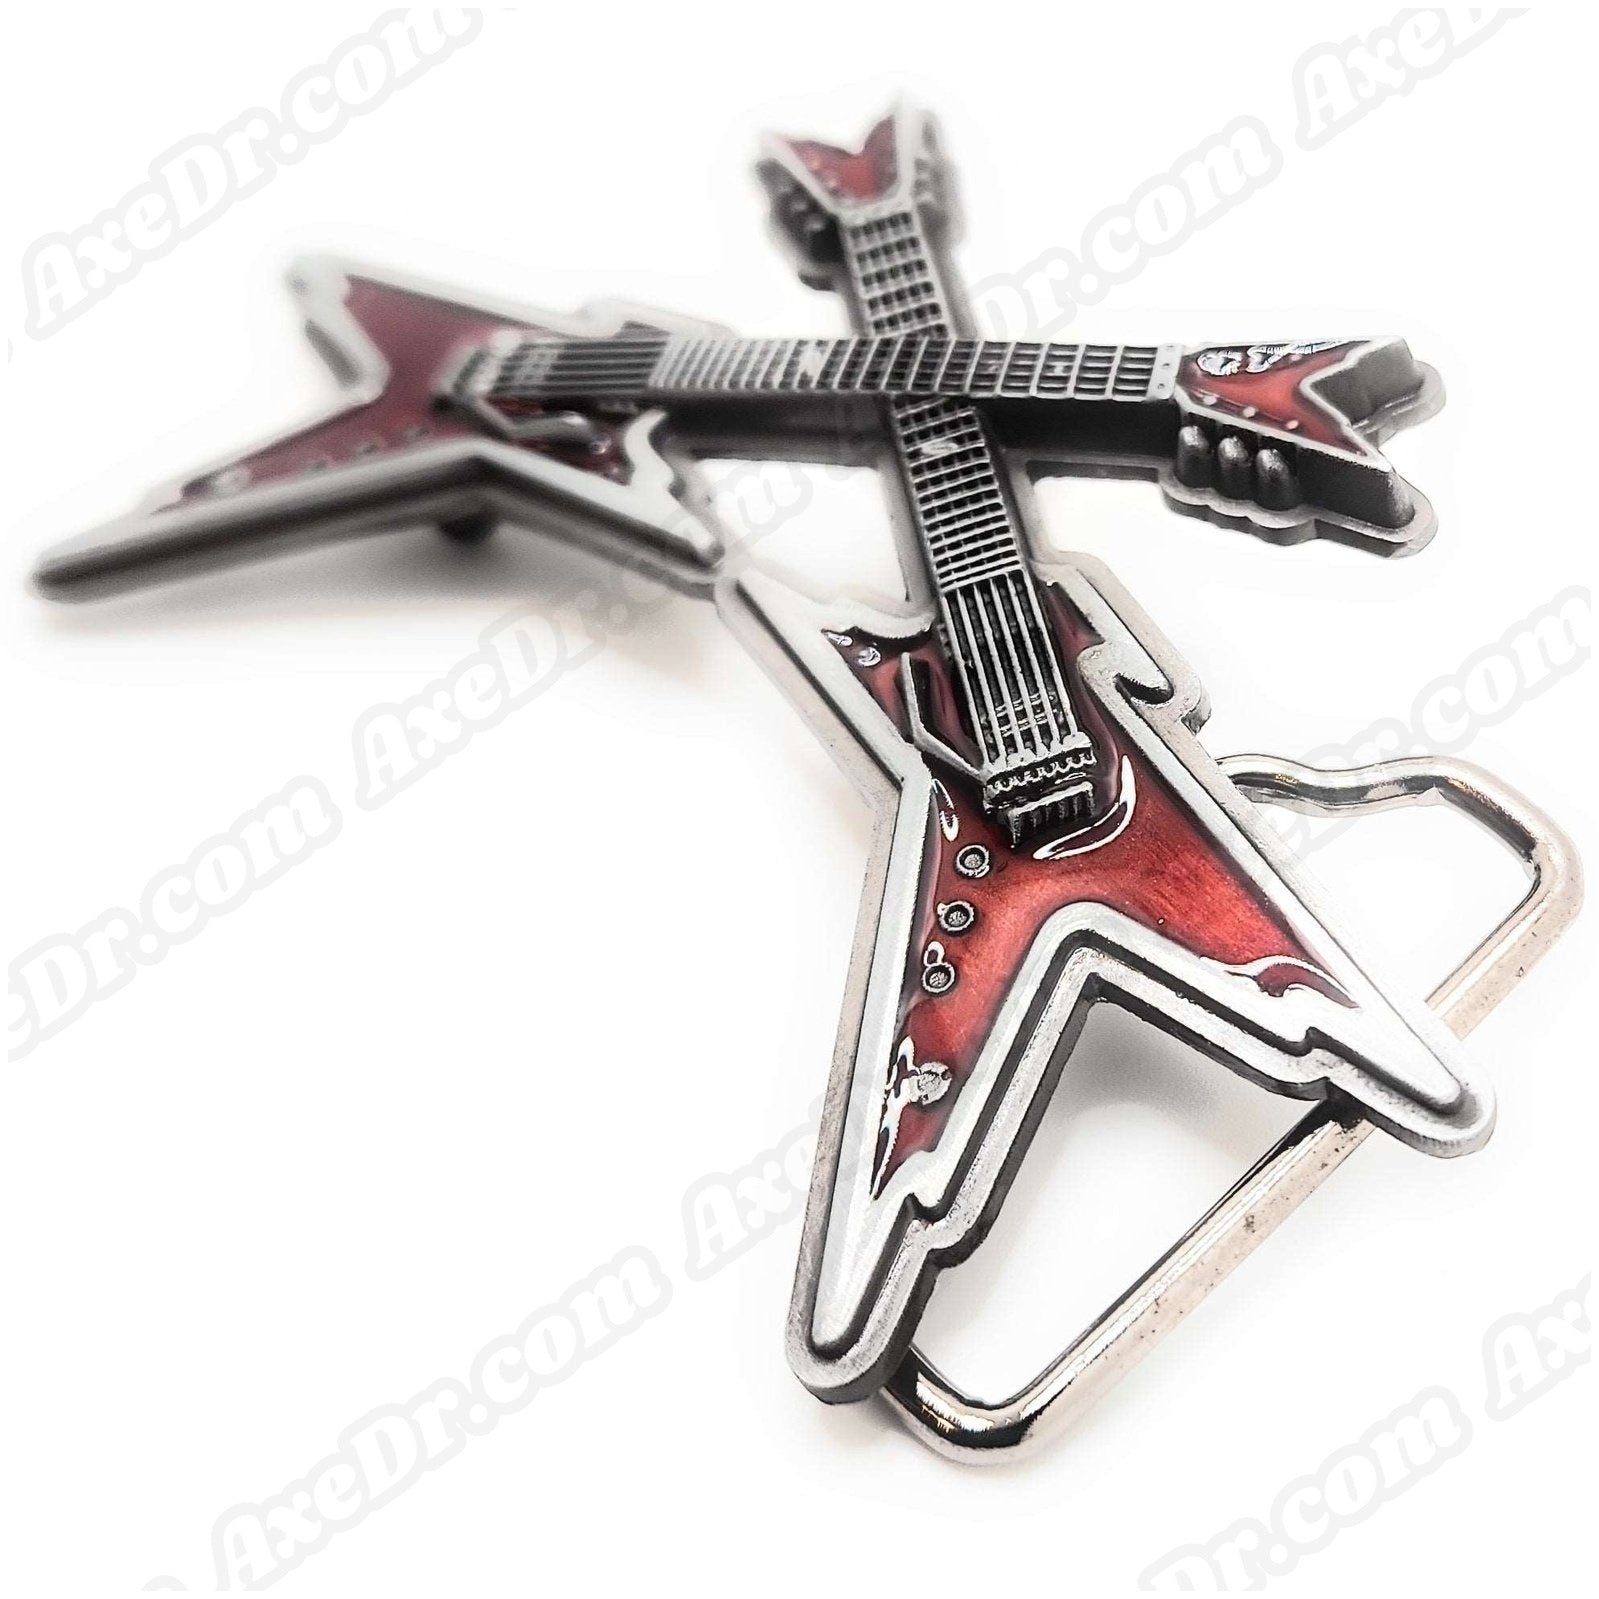 Dual Guitars Red Belt Buckle / Crossed Guitars Belt Buckle shop.AxeDr.com belt, Belt Buckle, beltbuckle, buckle, electric guitarist gift, Gifts for Guitarists, Goth belt, gui